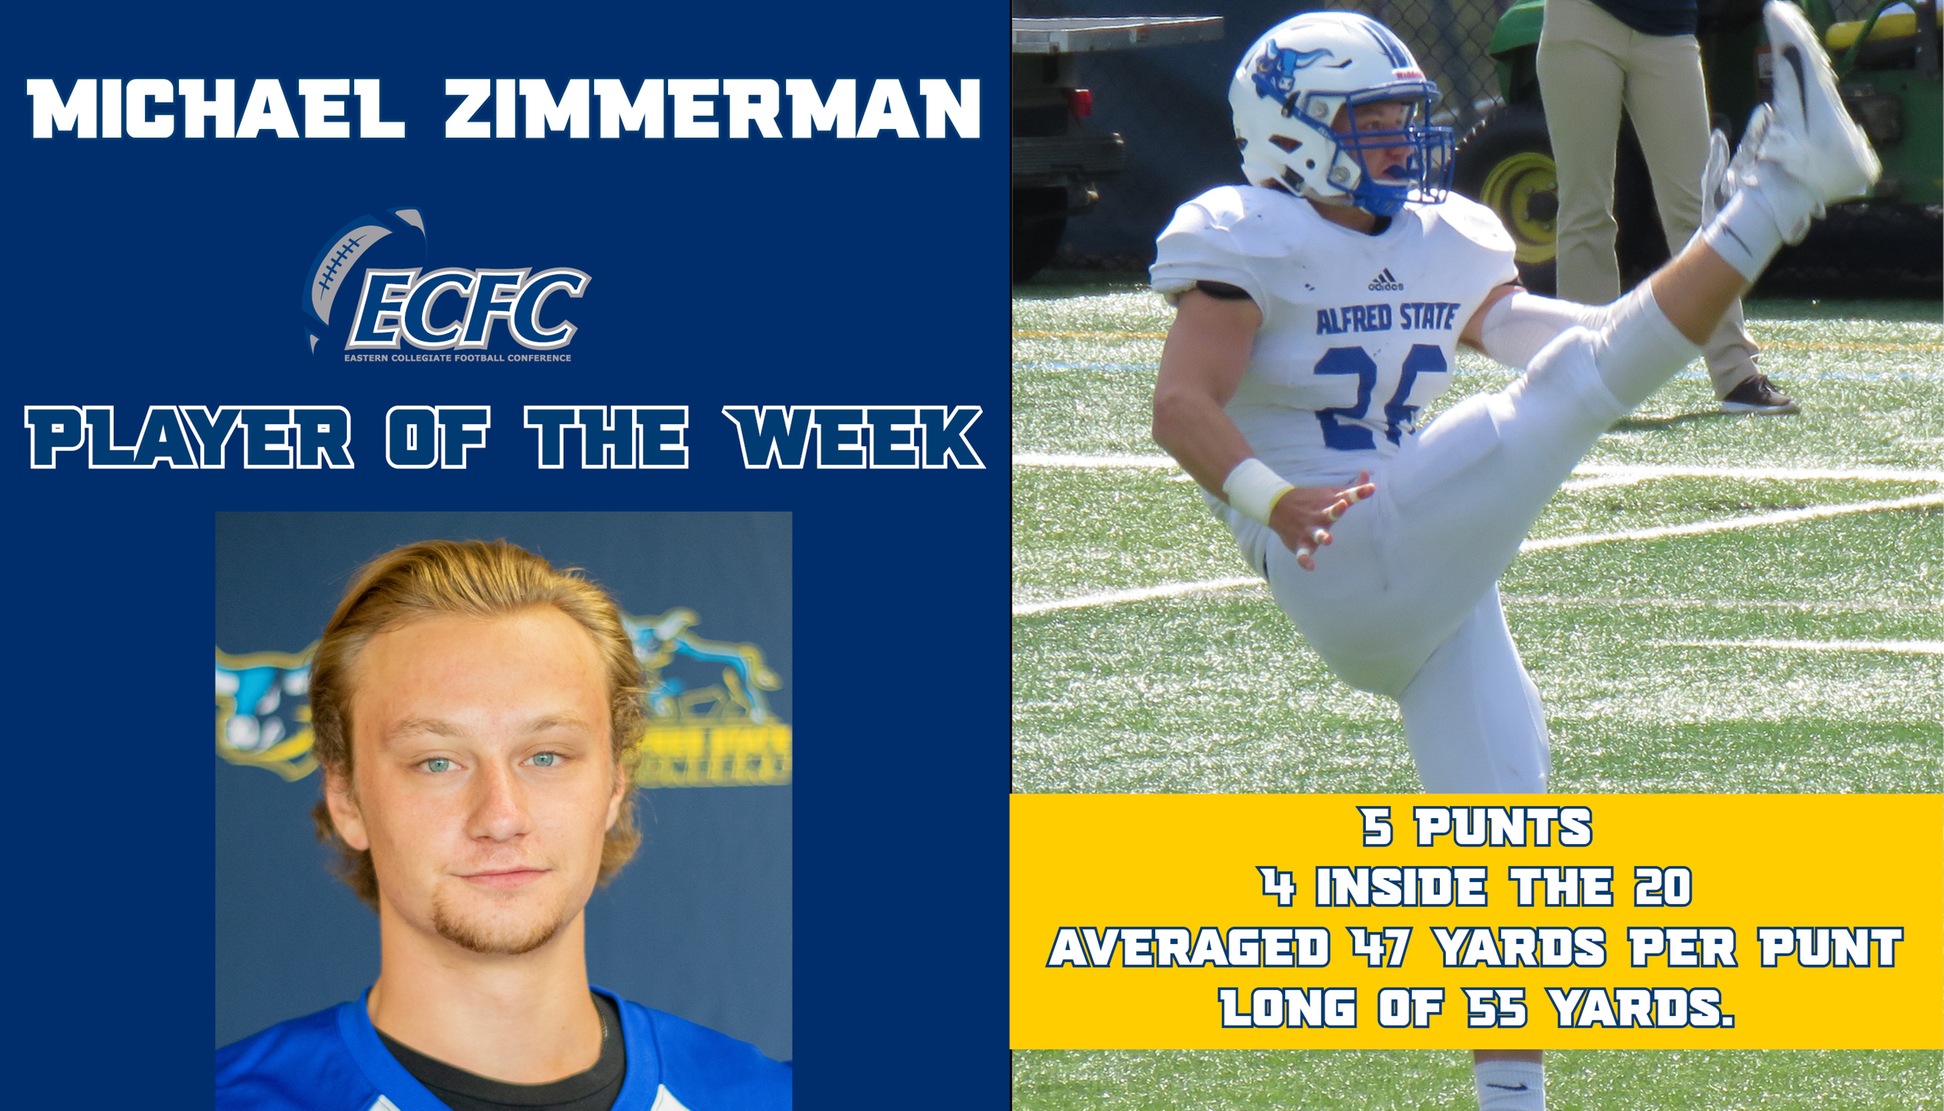 Michael Zimmerman has been named ECFC Special Teams Player of the Week for the second consecutive week.